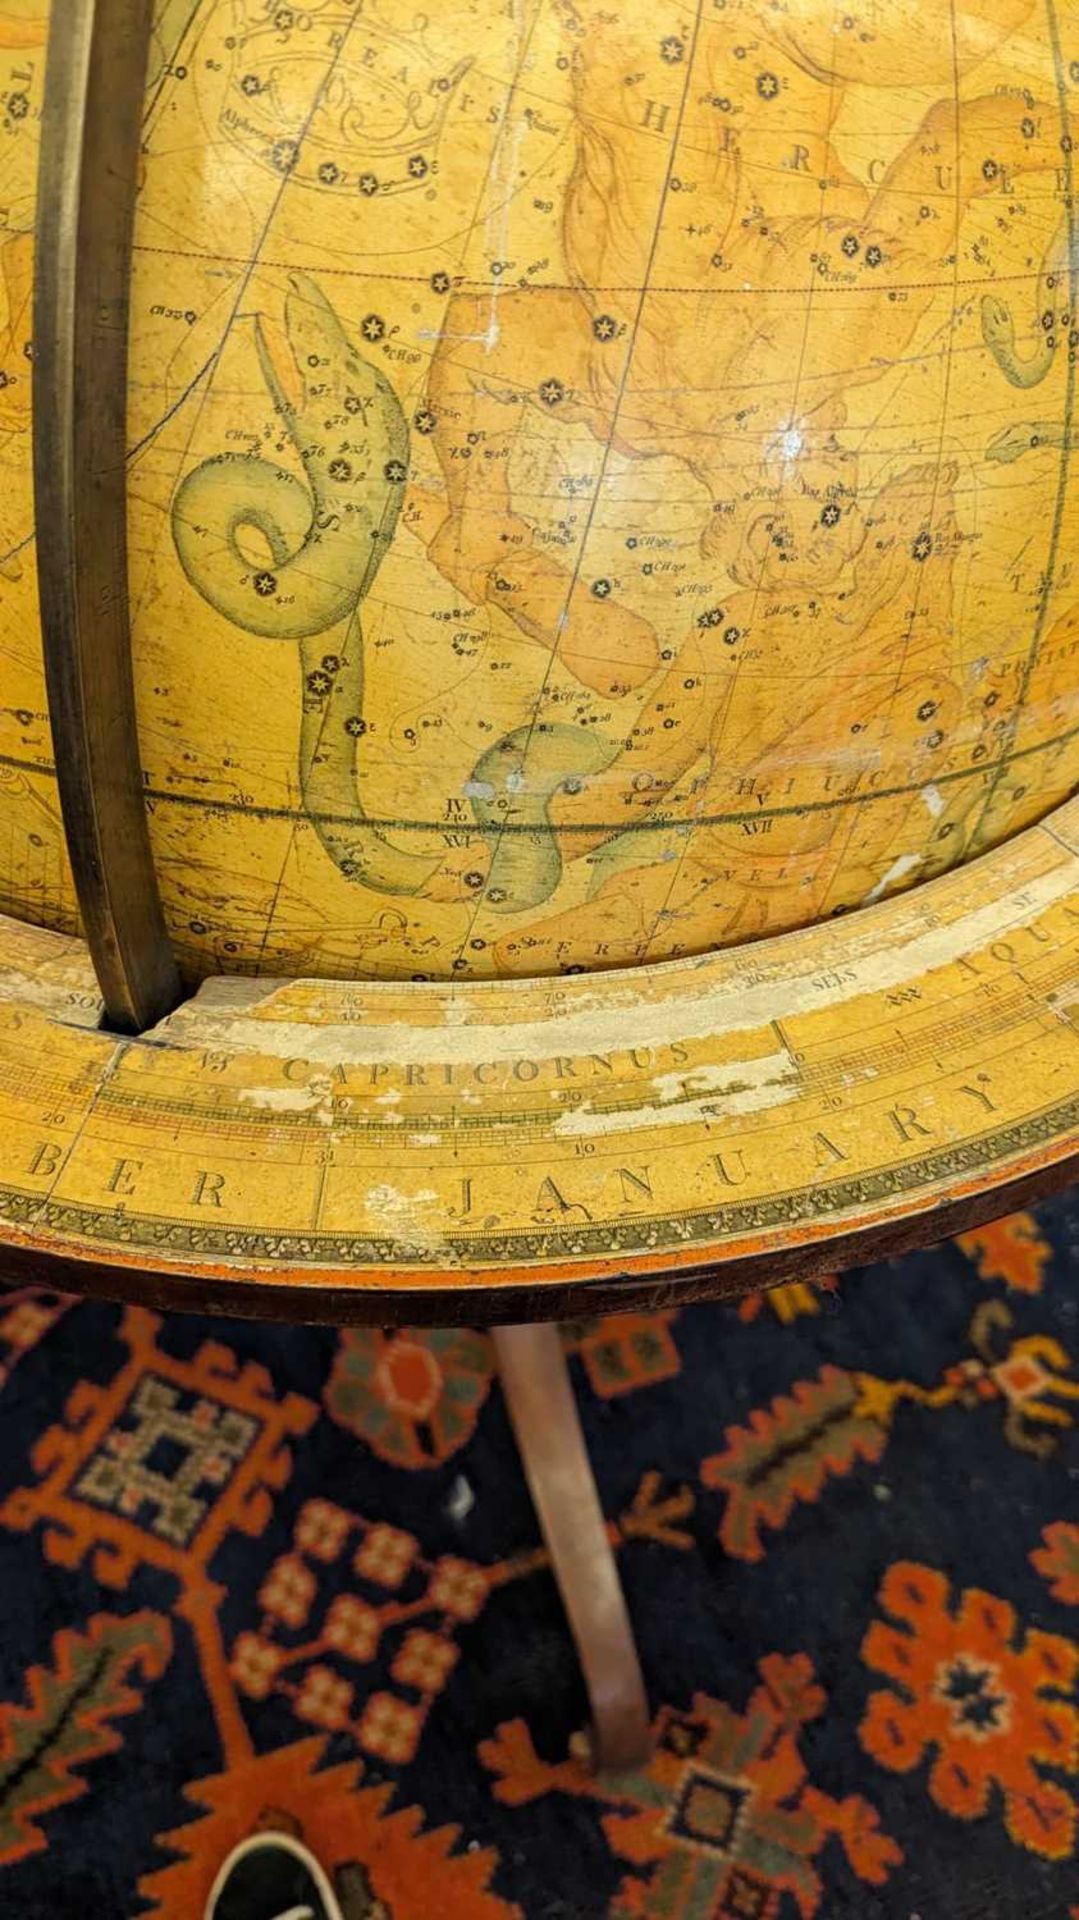 A large celestial library globe by J & W Cary, - Image 56 of 84